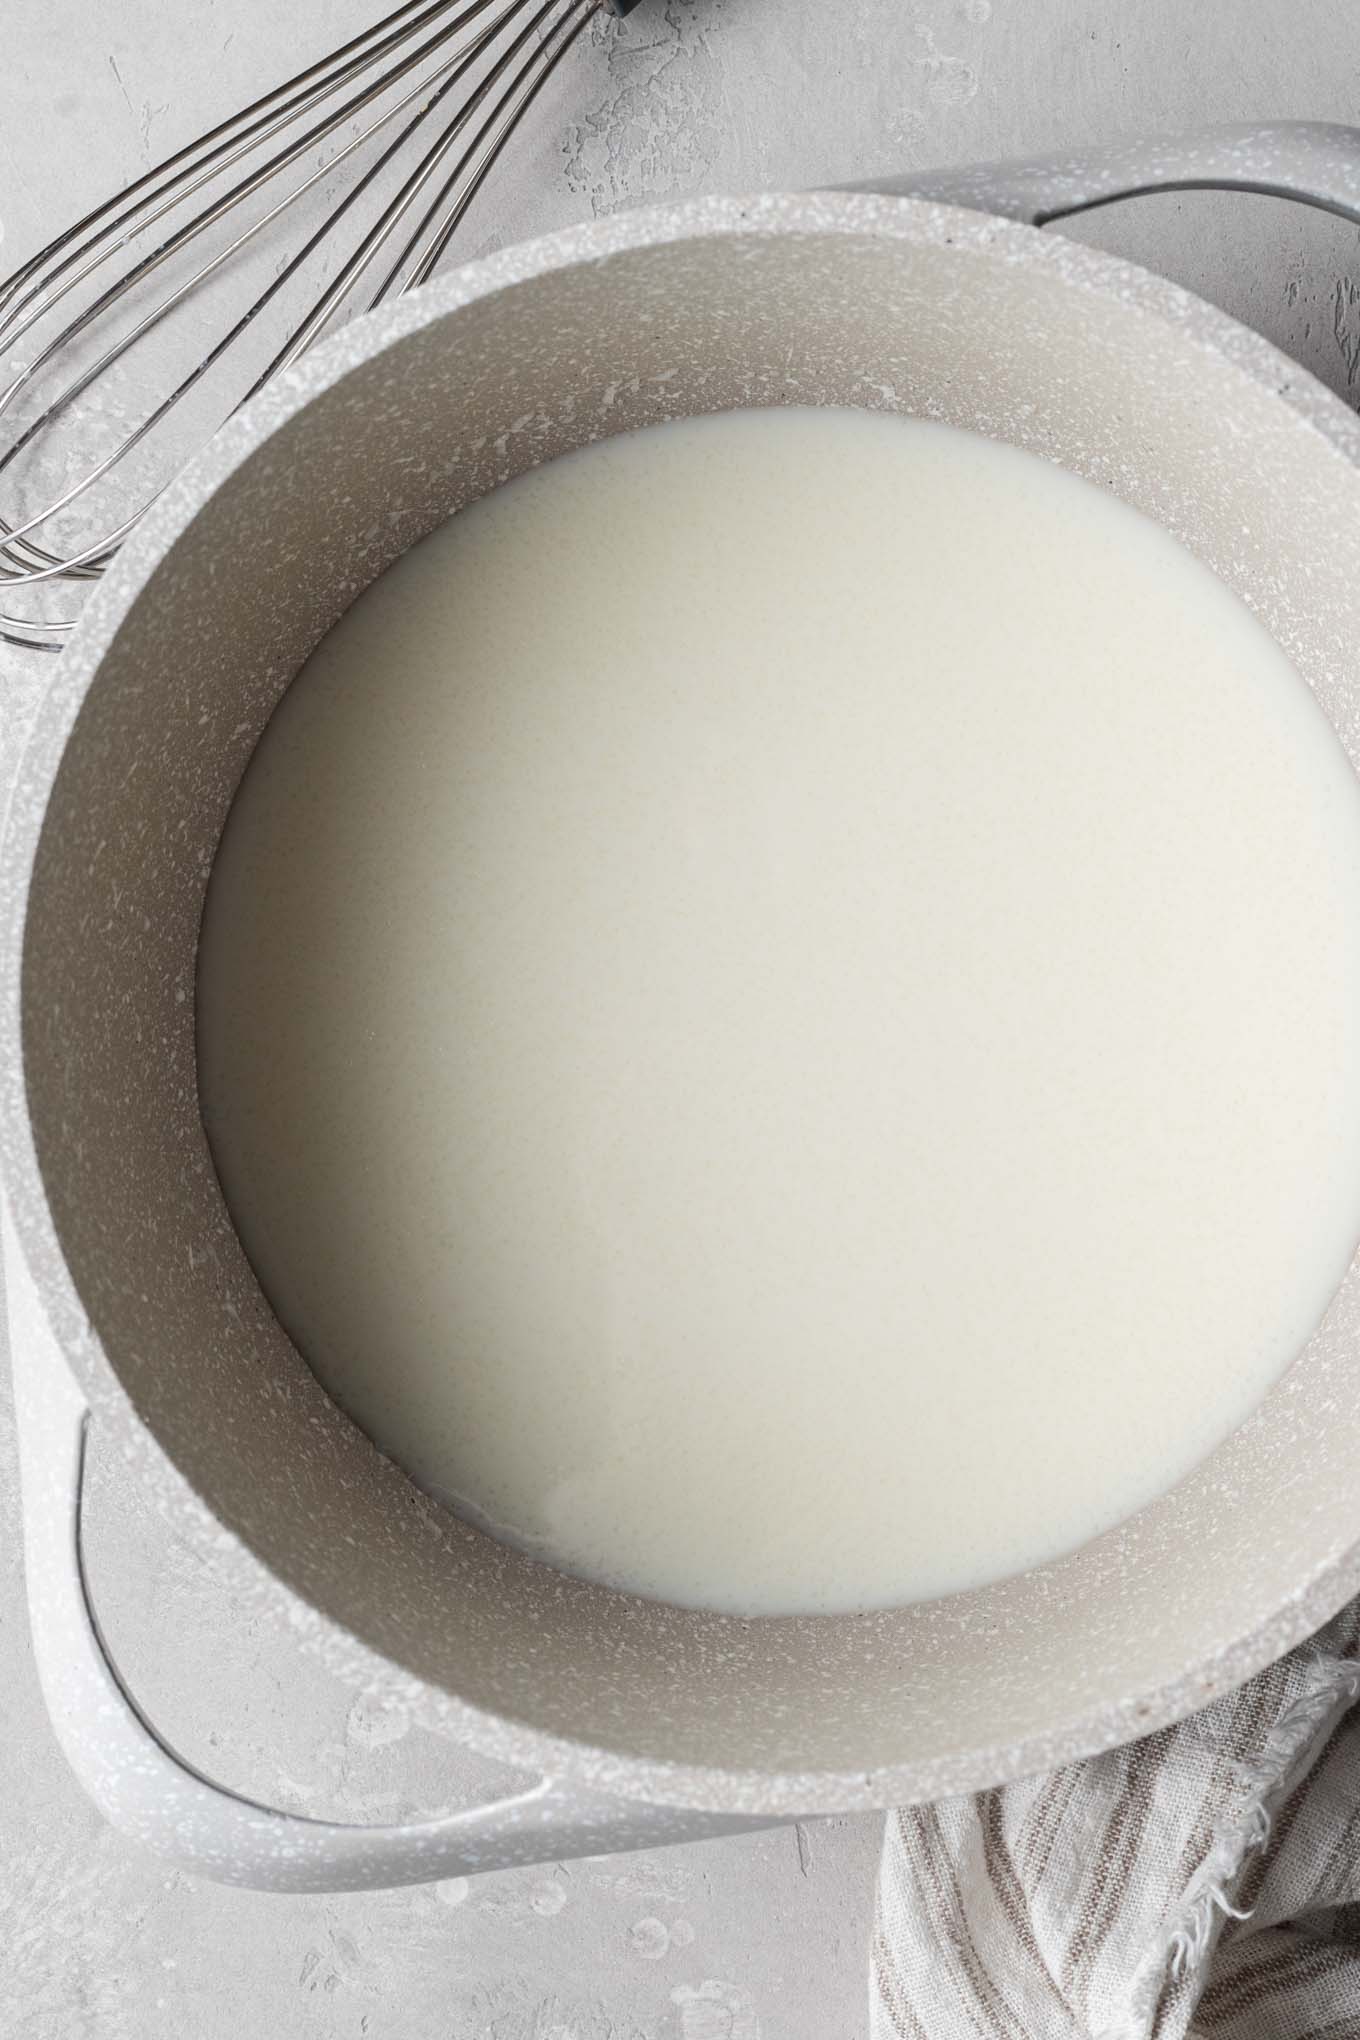 An overhead view of a warm milk and gelatin mixture.